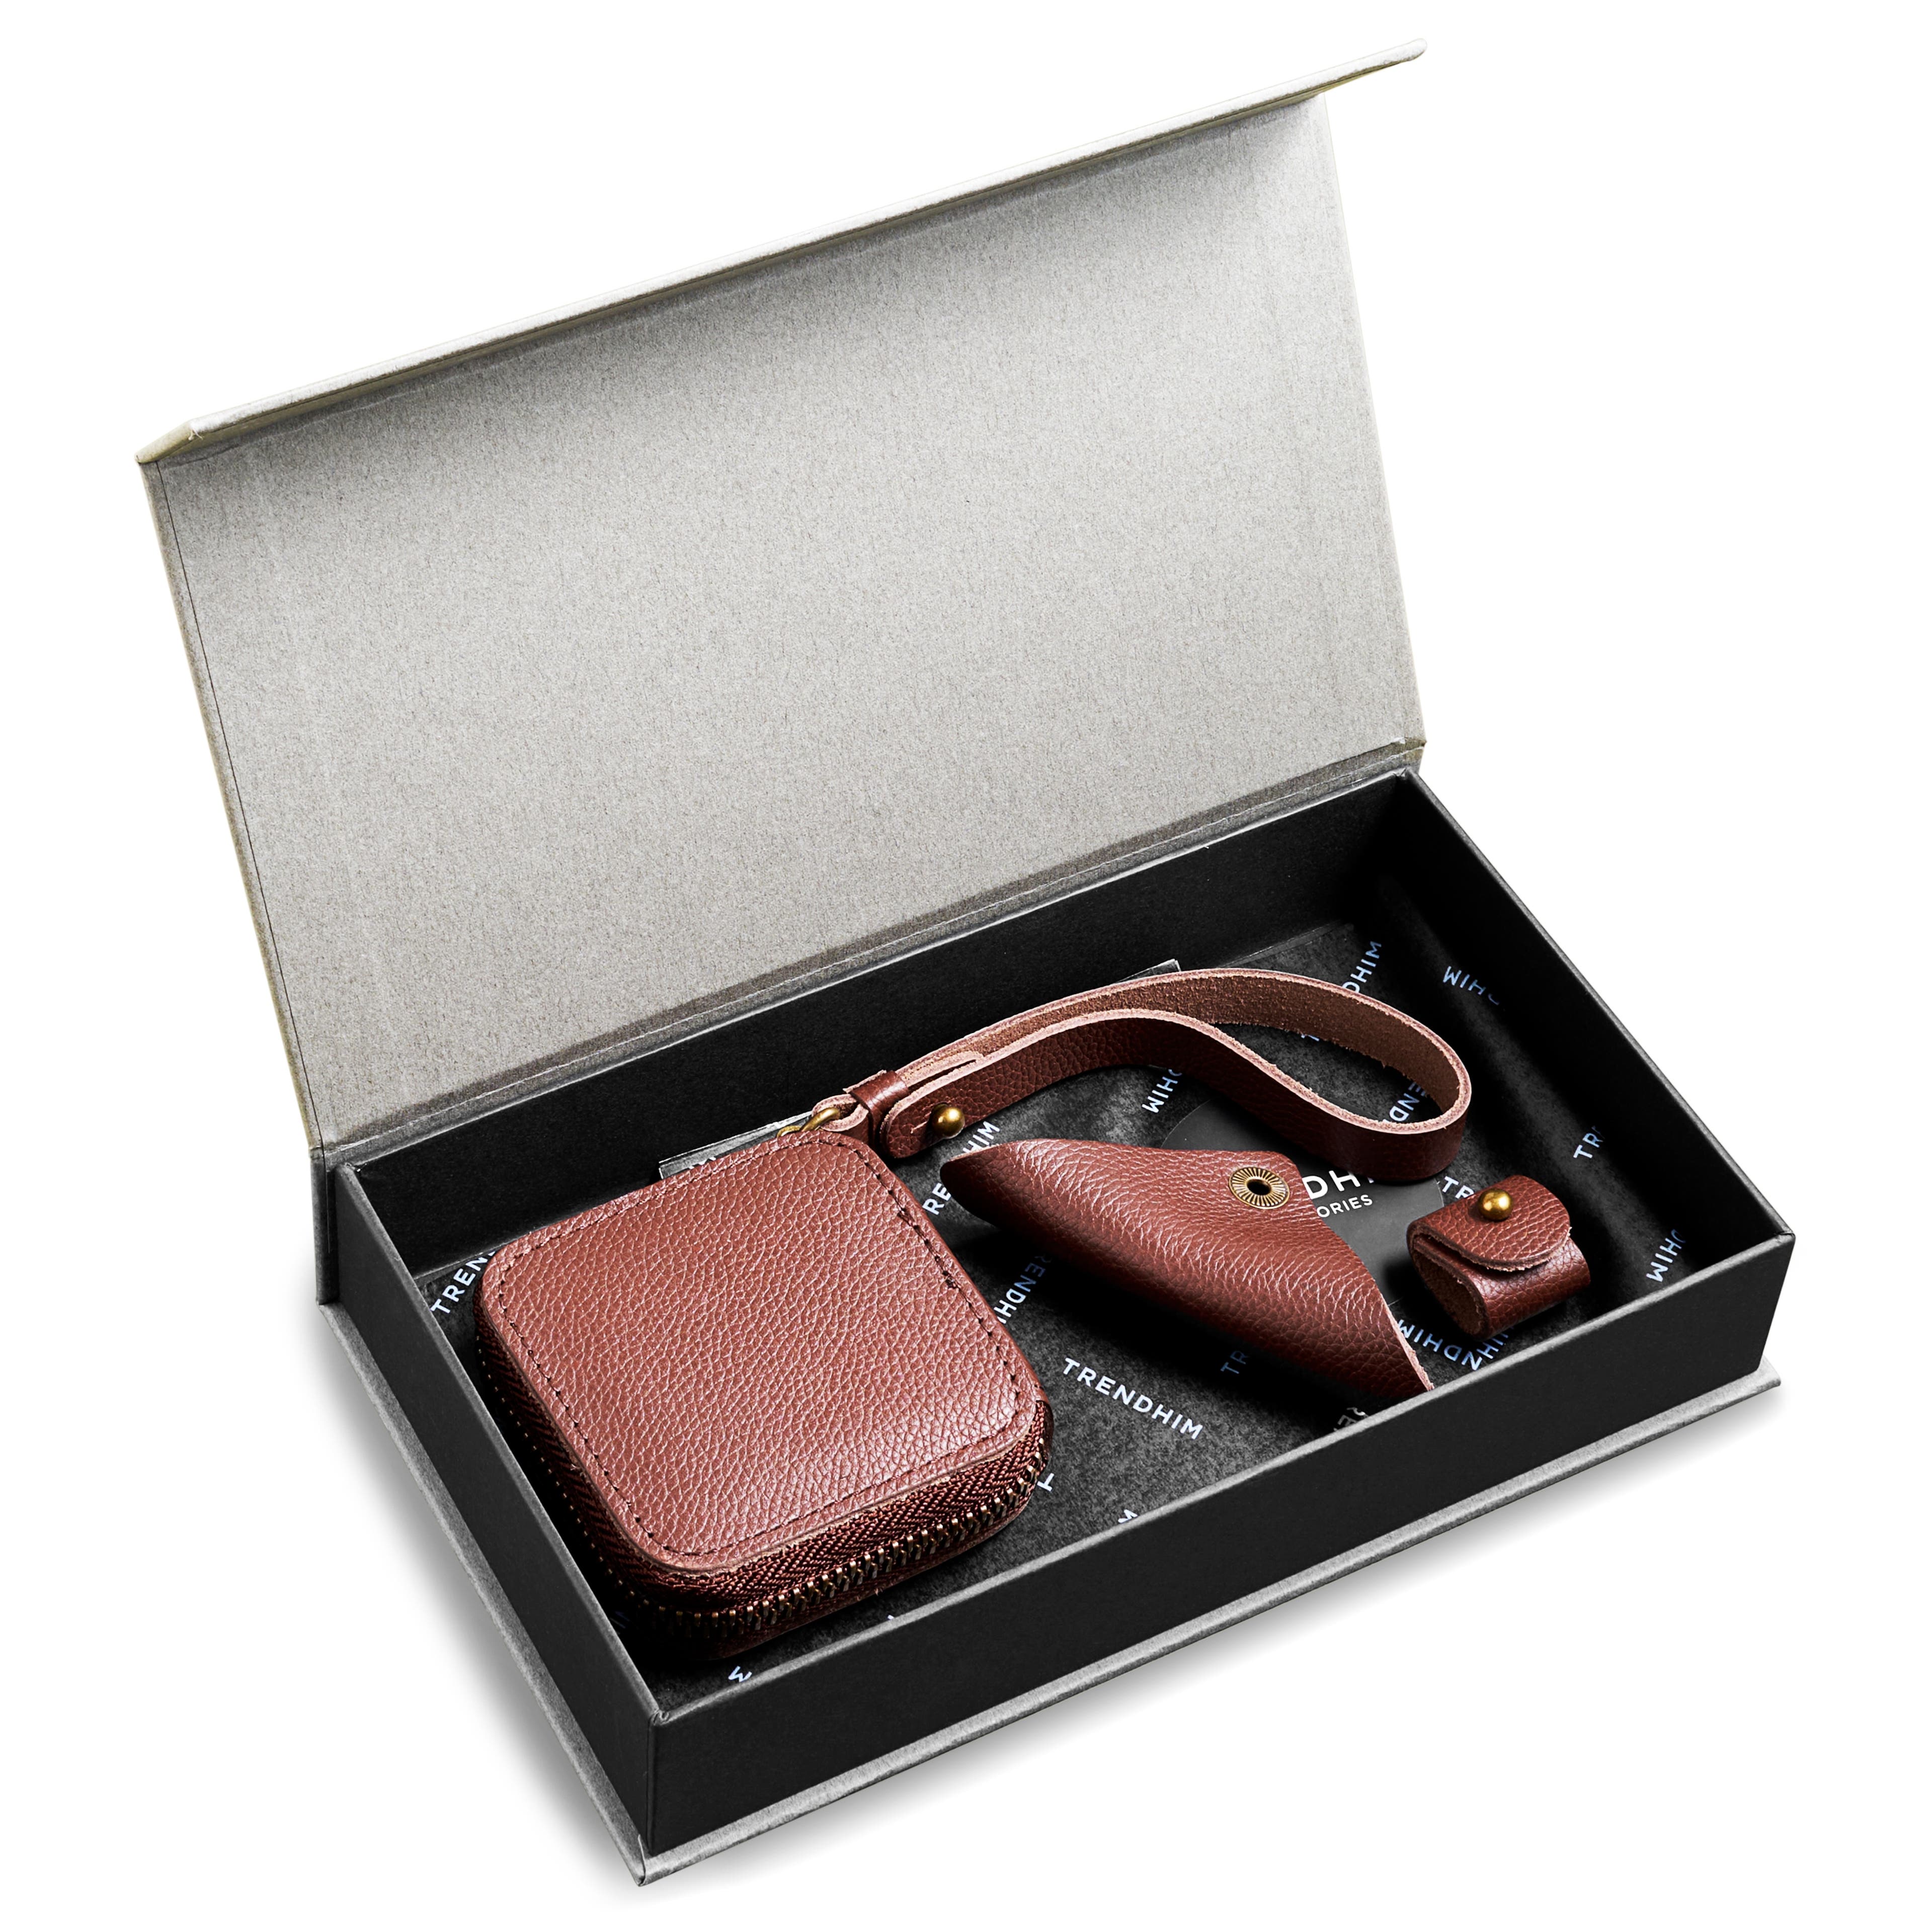 Professional Organizer Gift Box | Brown Leather